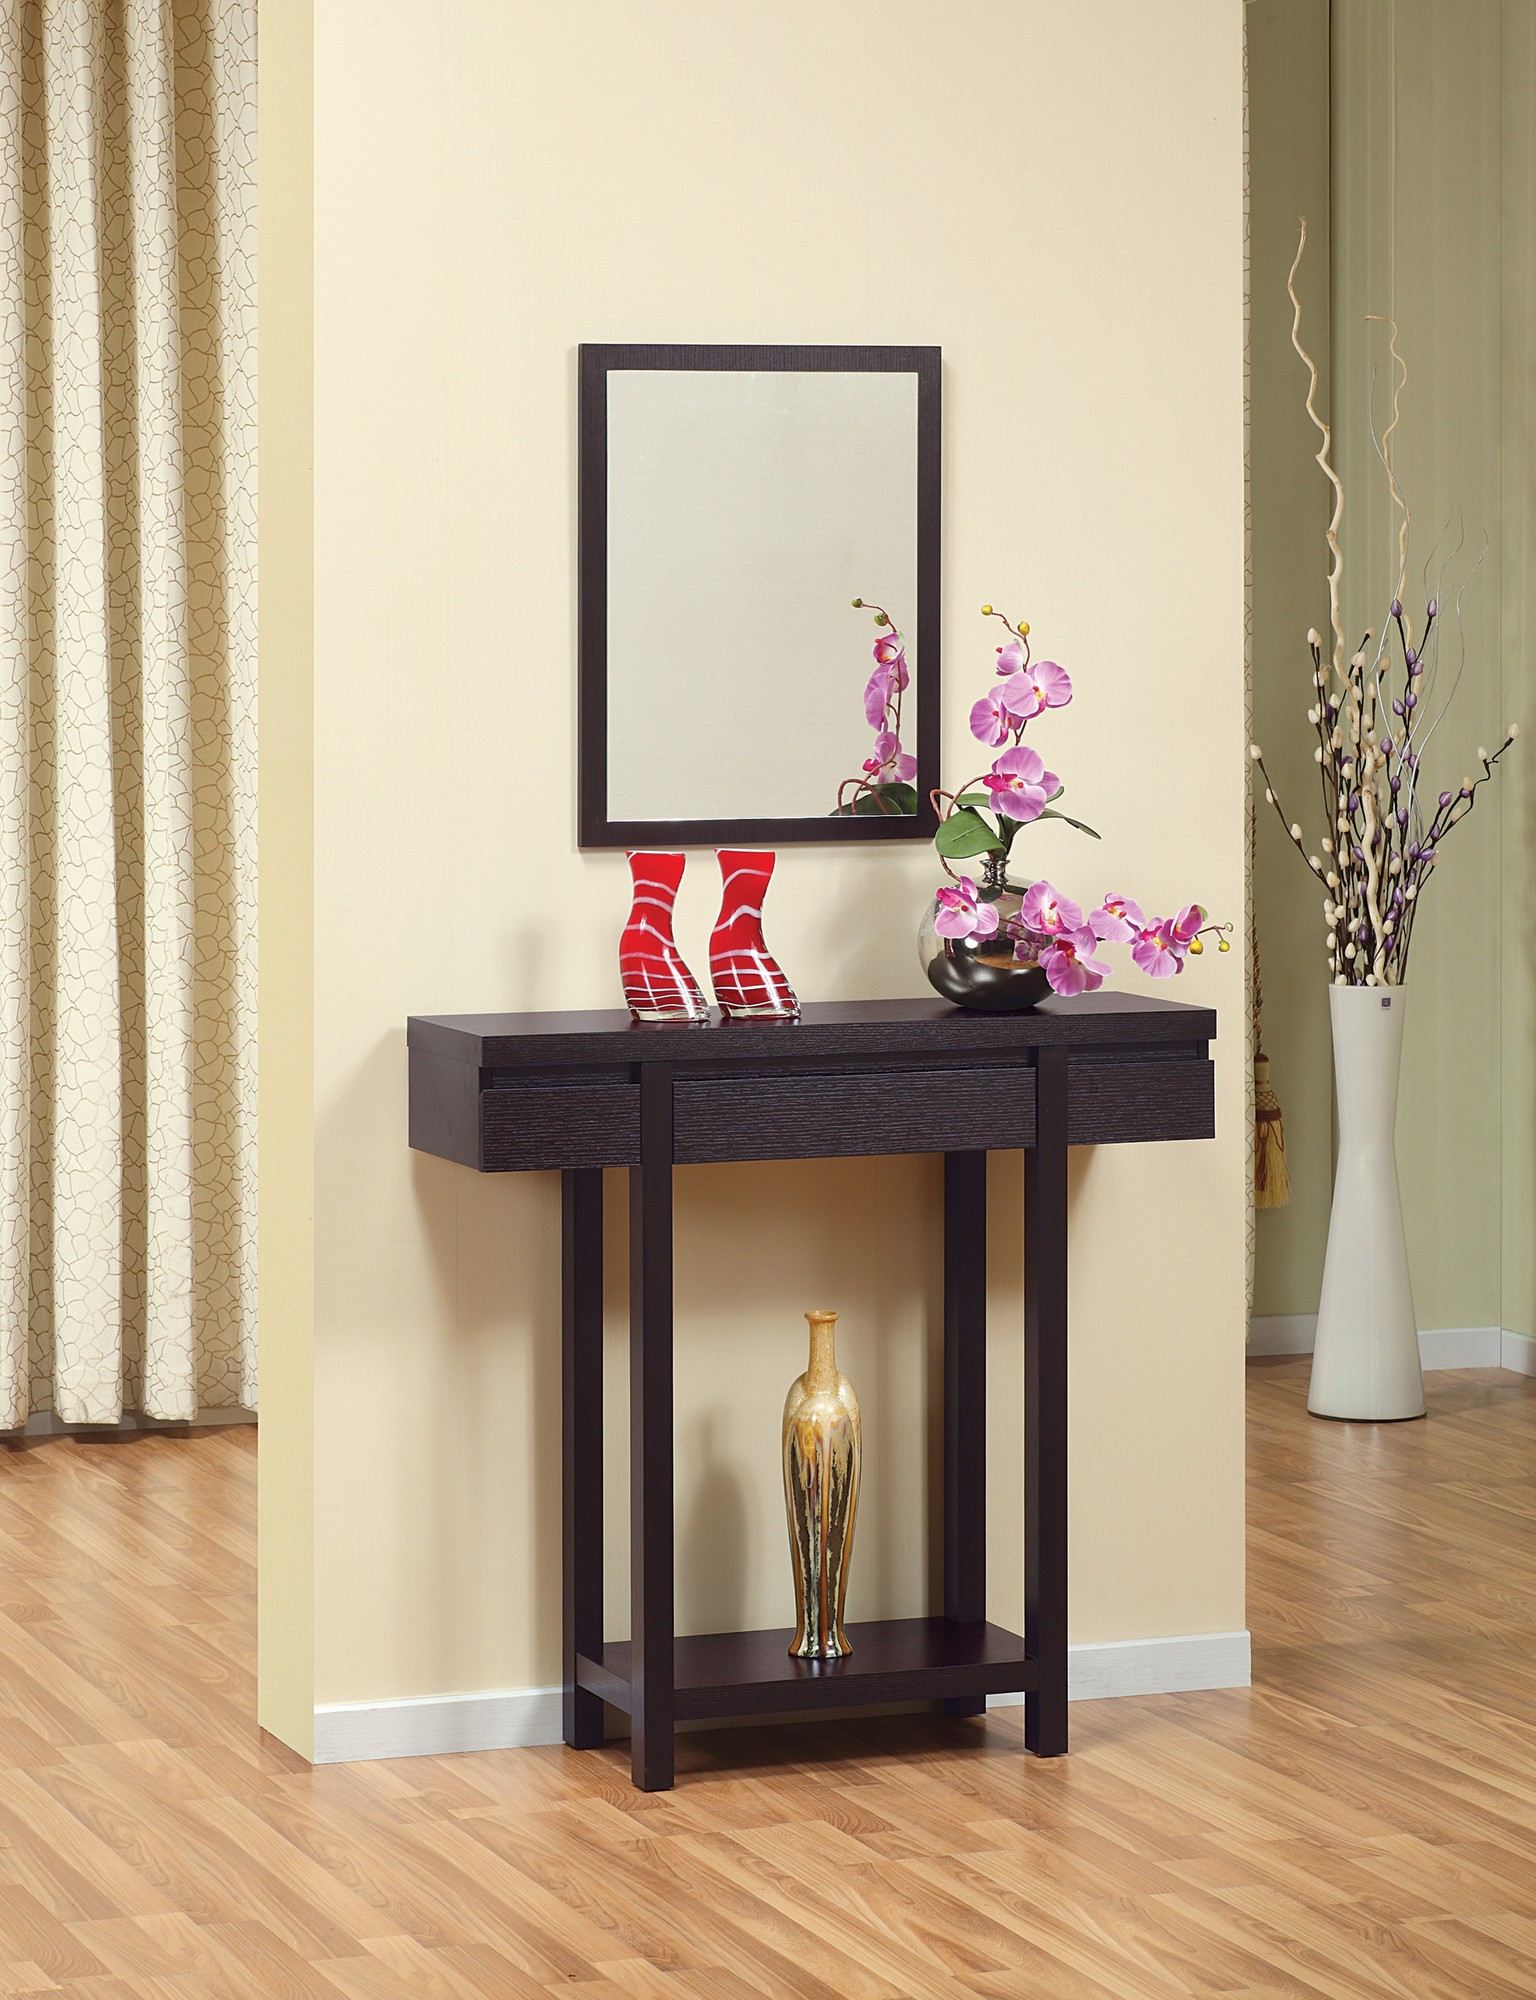 Holme red cocoa hallway table